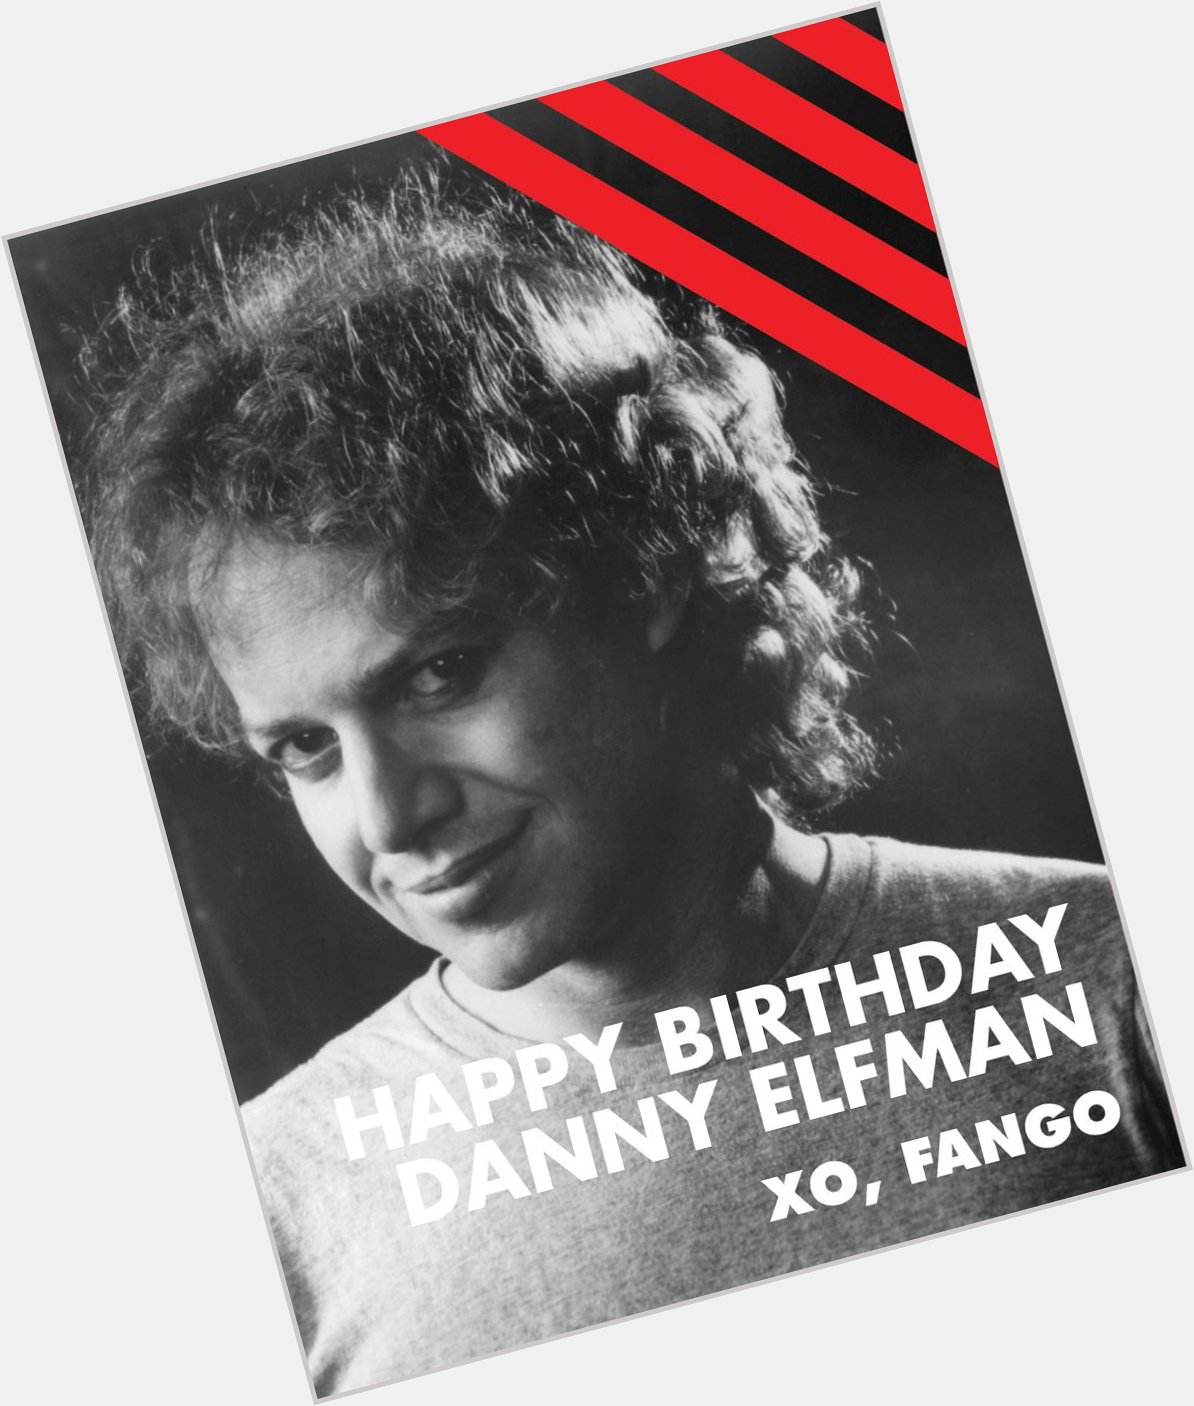 Happy Birthday Danny Elfman! Wishing you many more years of bringing music to our fears! XO, Fango 